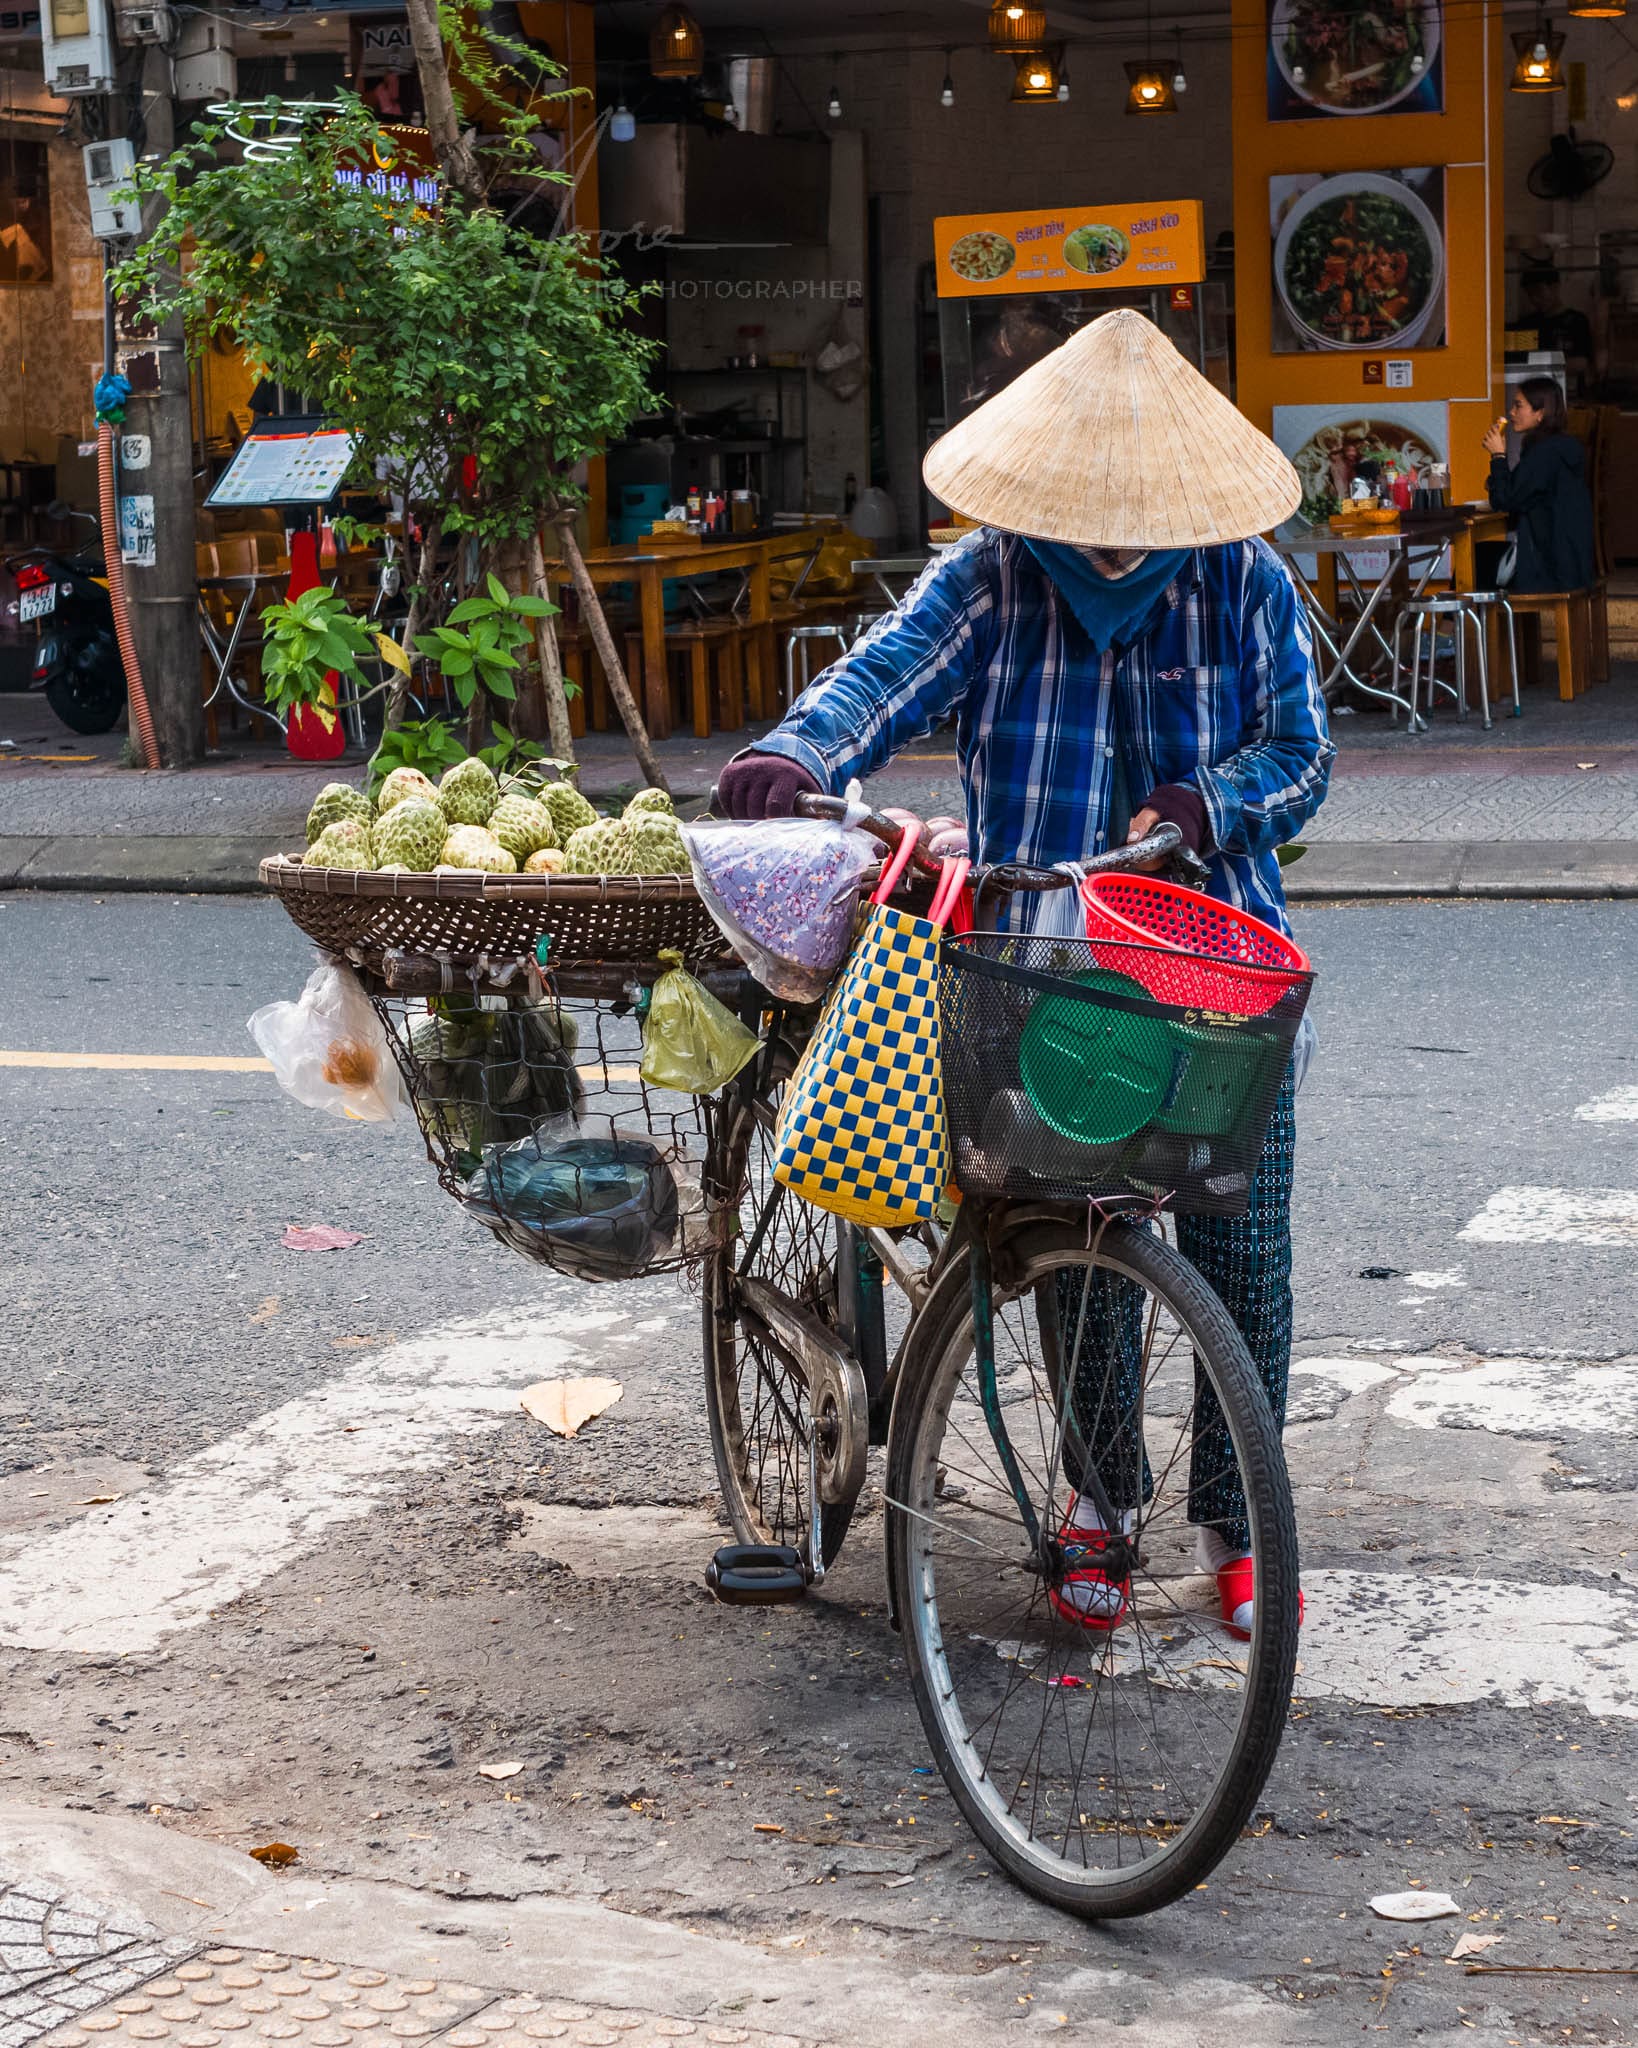 Woman in traditional attire vending goods on a bicycle in a Da Nang city.